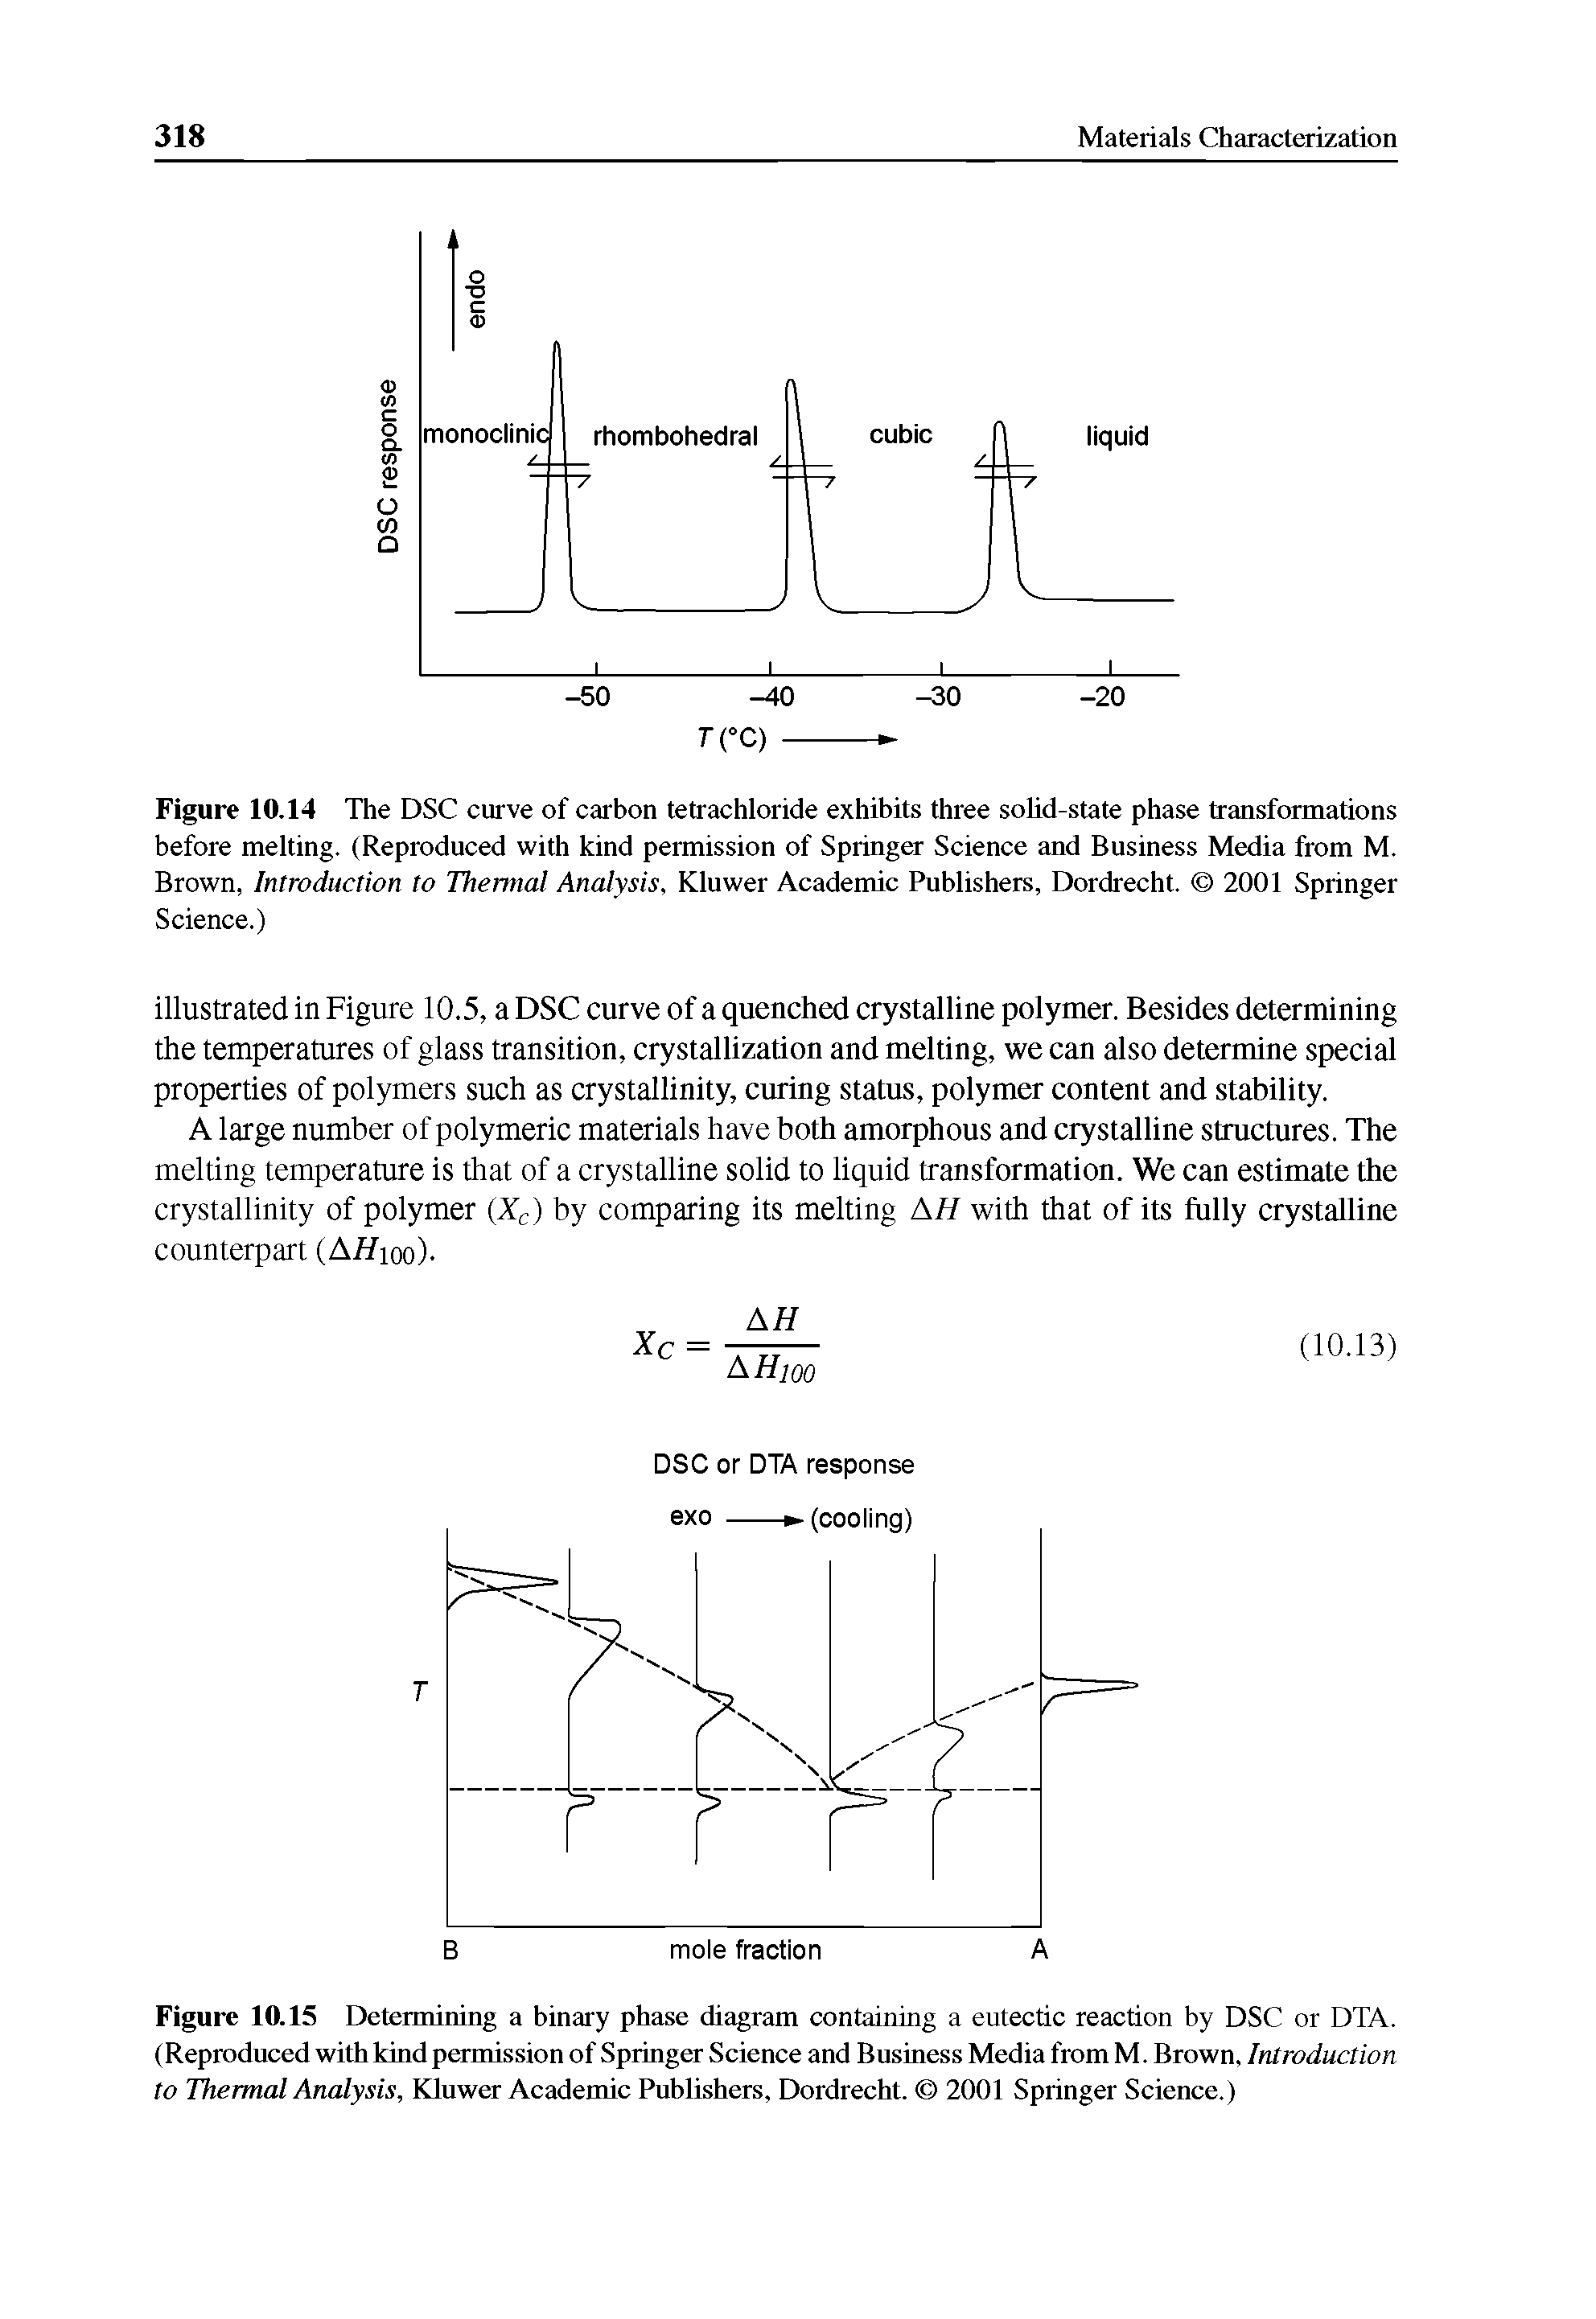 Figure 10.14 The DSC curve of carbon tetrachloride exhibits three solid-state phase transformations before melting. (Reproduced with kind permission of Springer Science and Business Media from M. Brown, Introduction to Thermal Analysis, Kluwer Academic Publishers, Dordrecht. 2001 Springer Science.)...